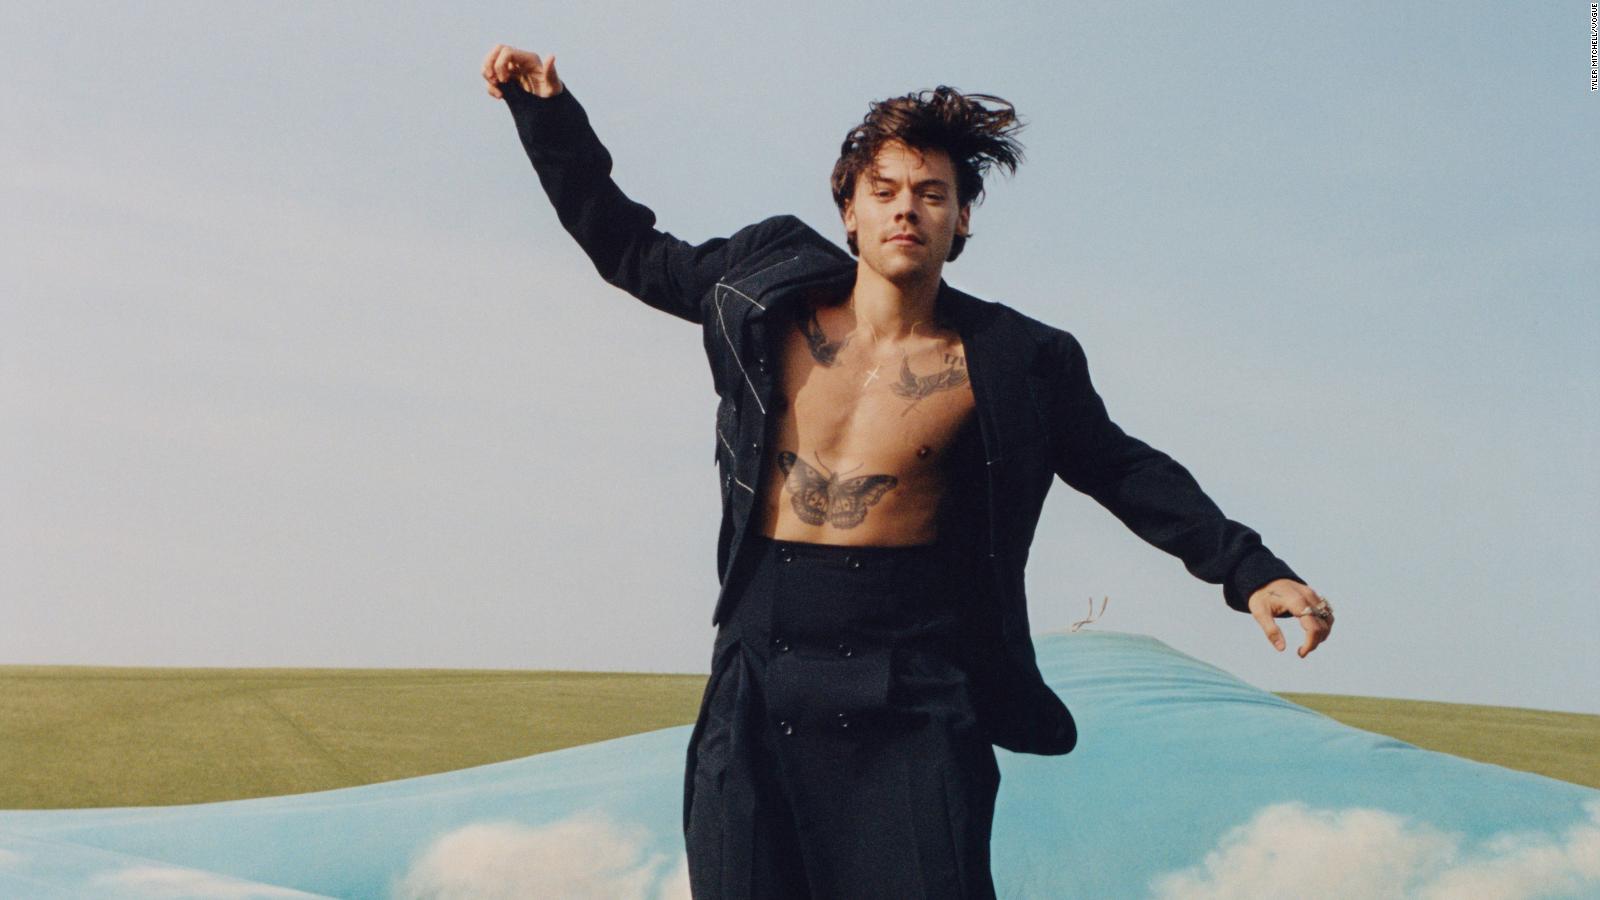 Harry Styles becomes Vogue's first-ever solo male cover star - CNN Style